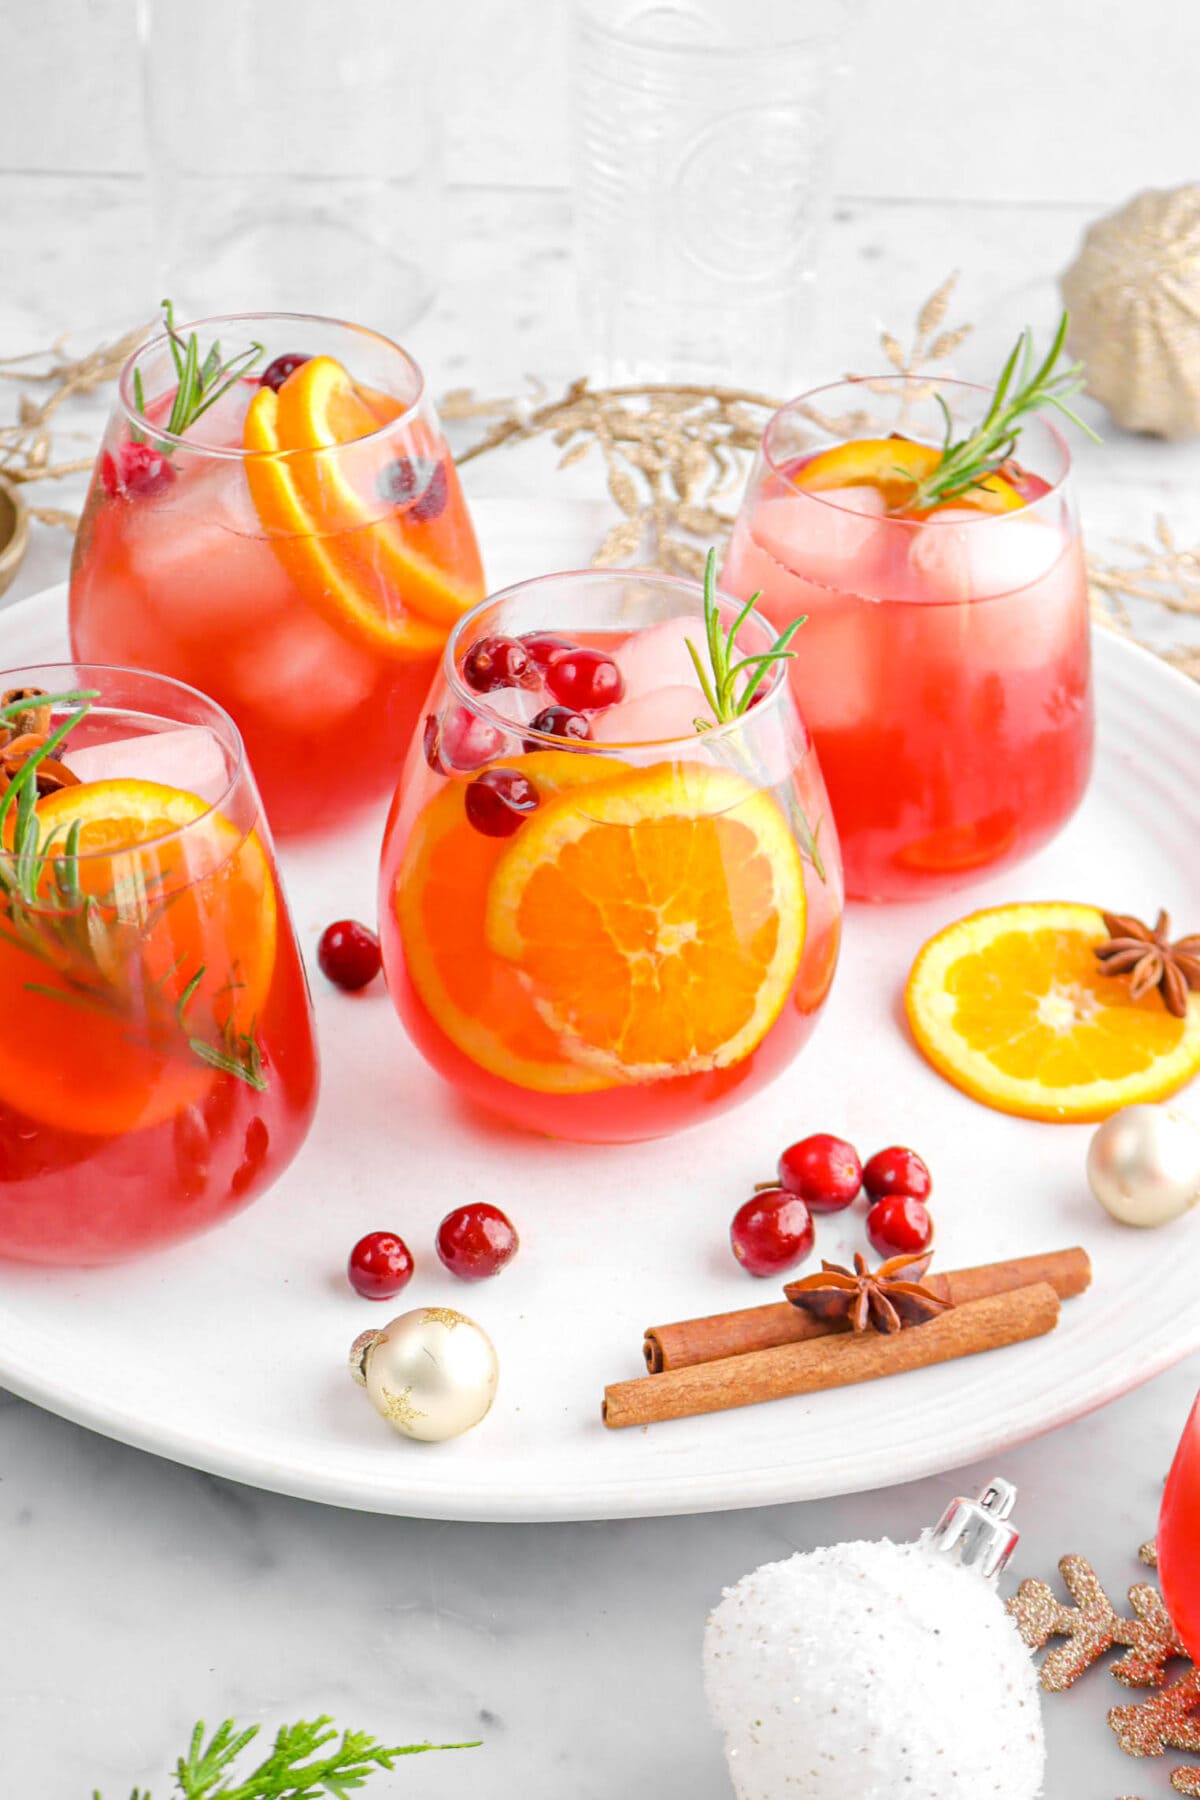 angled shot of four glasses of spiced punch on white tray with cinnamon sticks, star anise, slice of orange, and ornaments around.